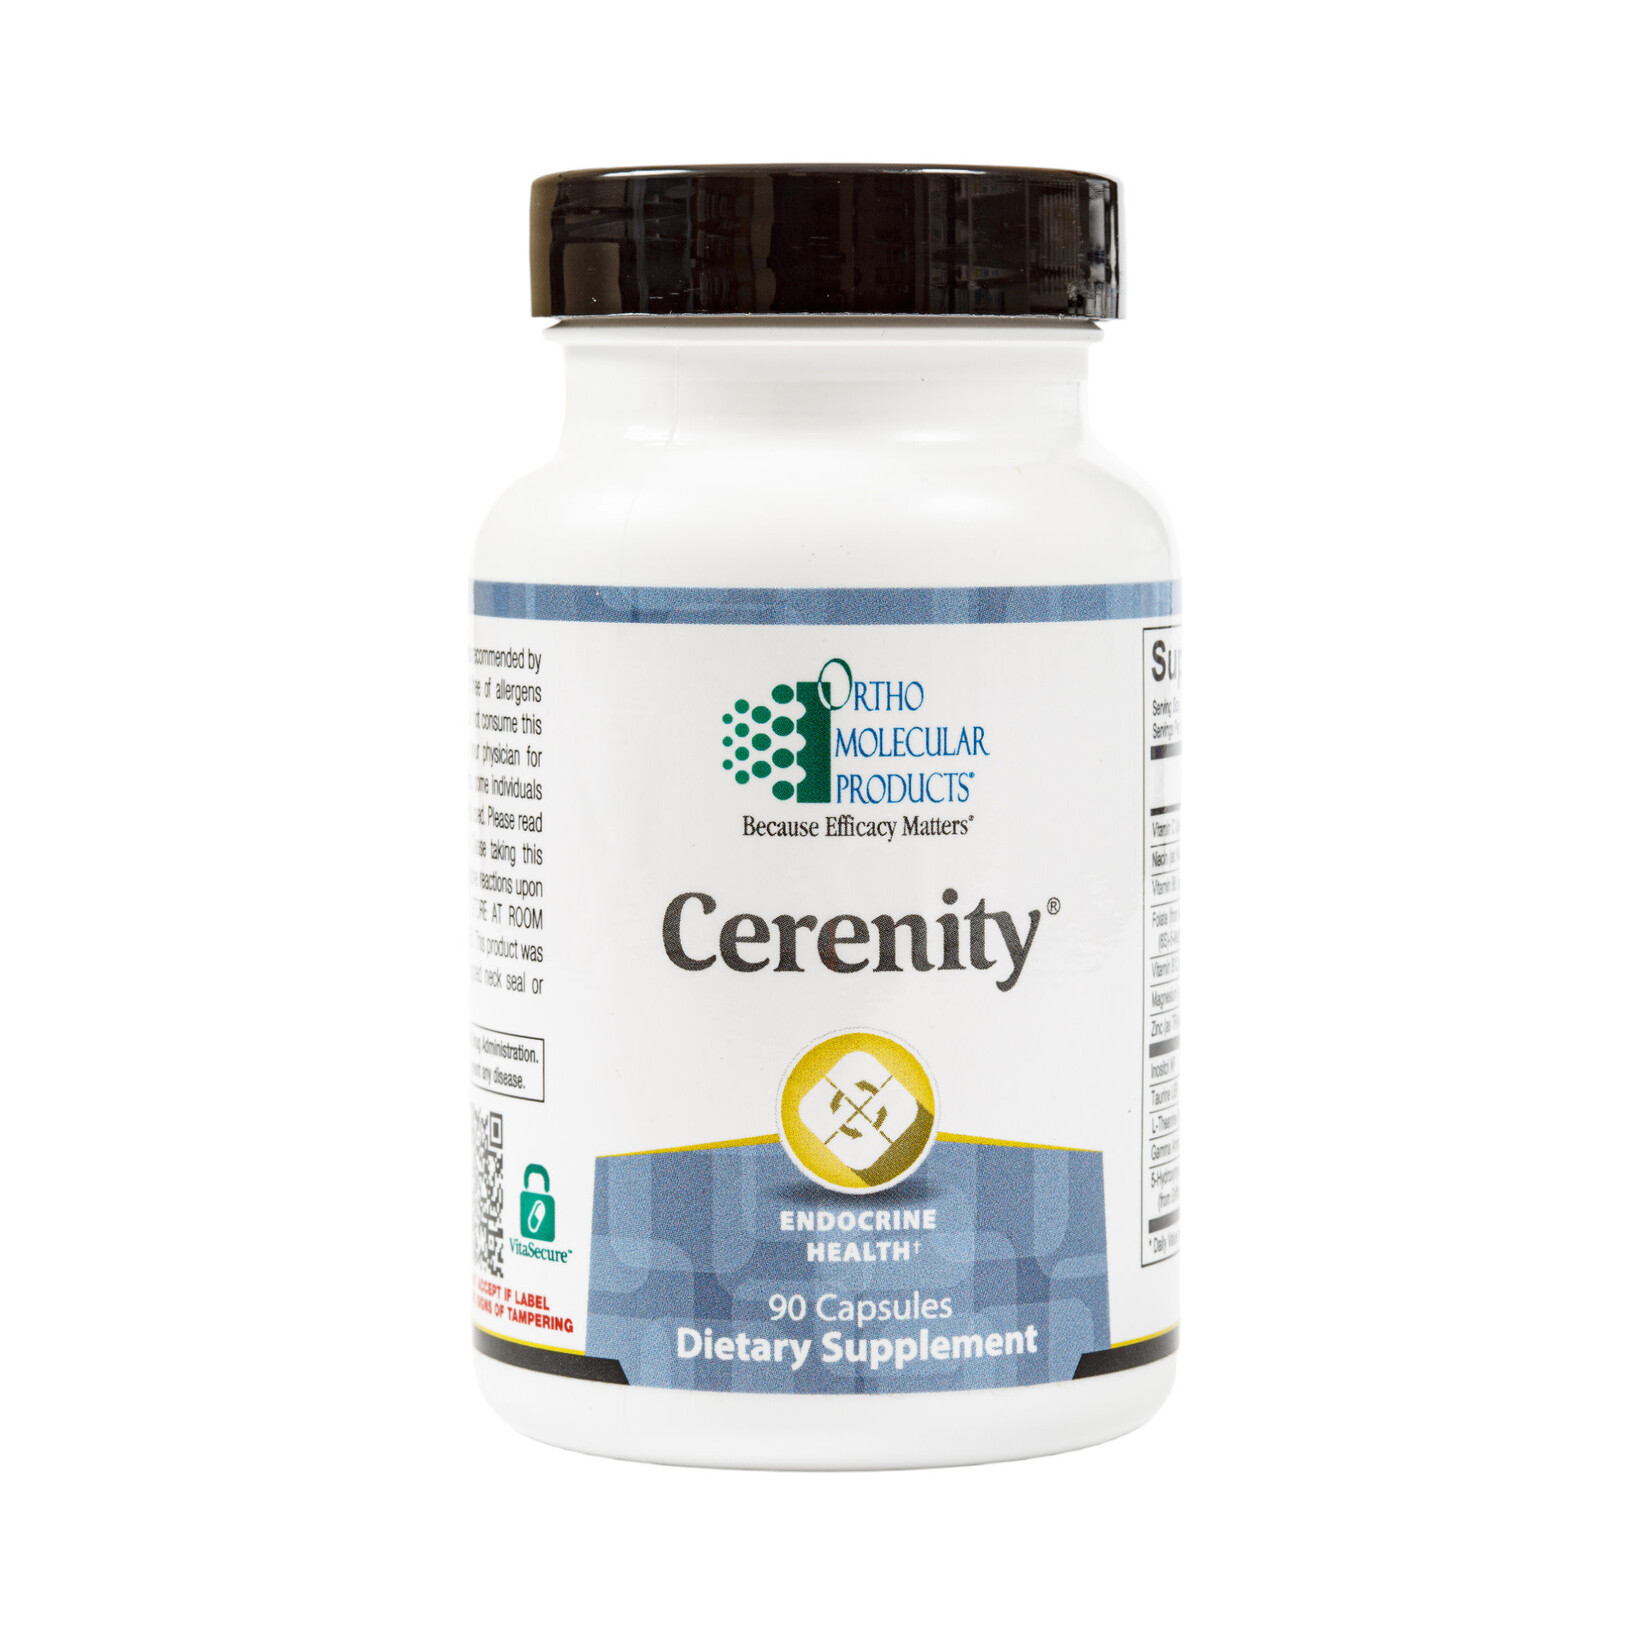 Ortho Molecular Products Cerenity 90c Ortho Molecular Products